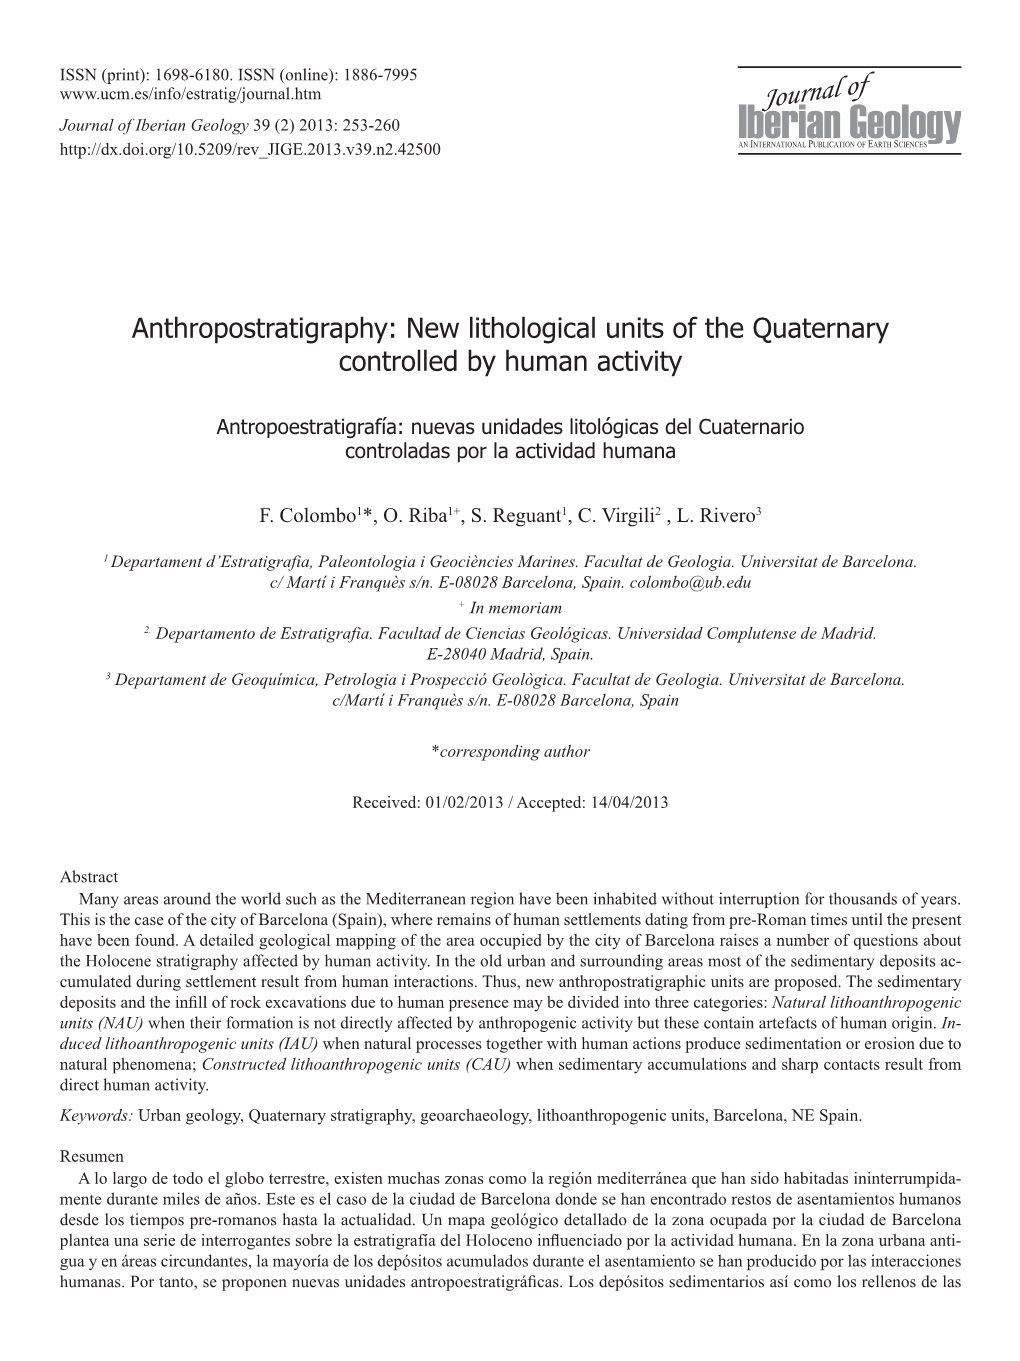 New Lithological Units of the Quaternary Controlled by Human Activity